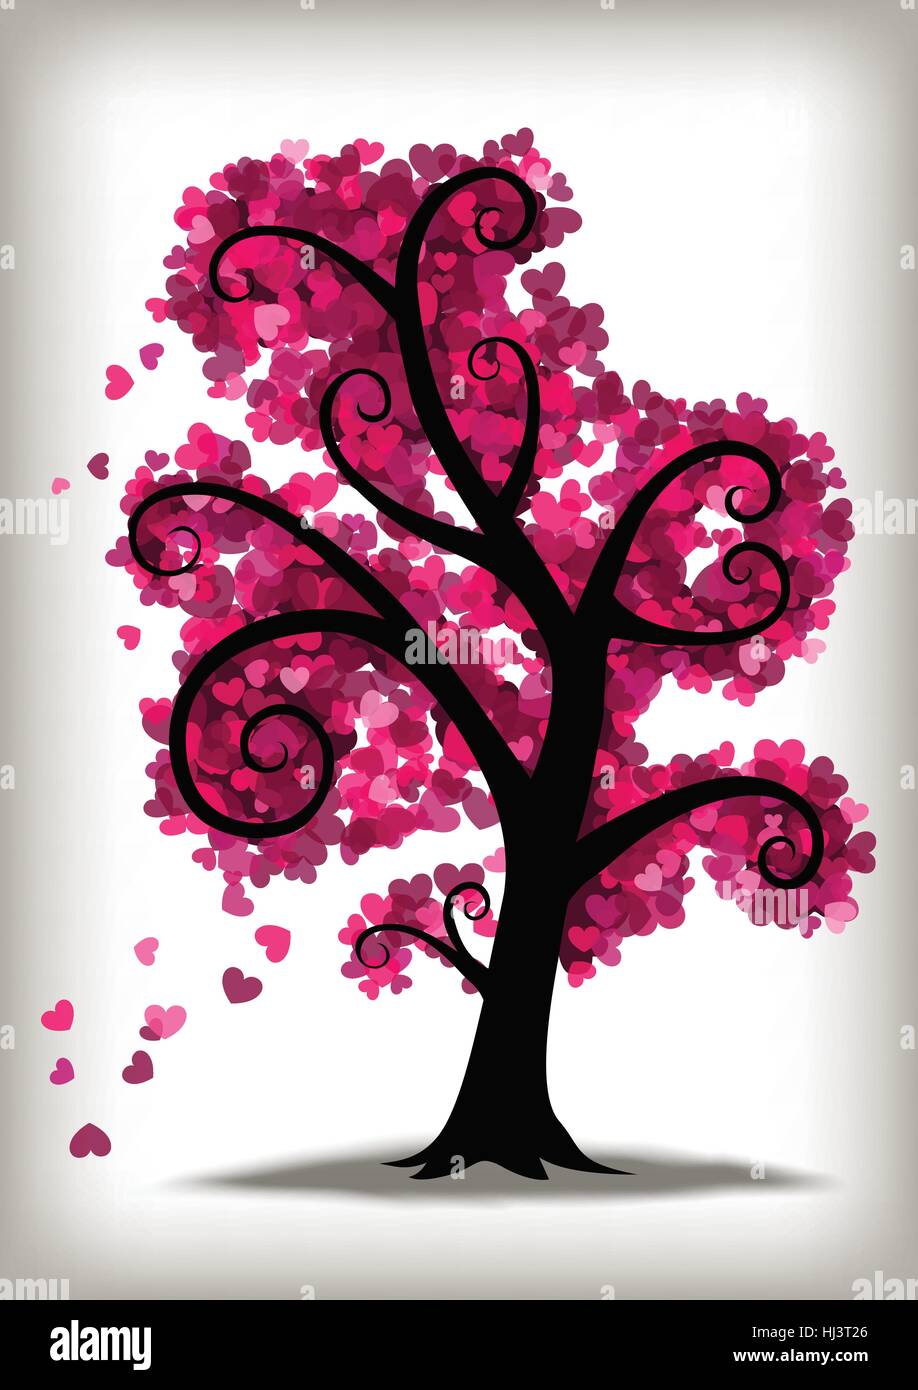 Curly tree with little pink and purple hearts for leaves Stock Vector